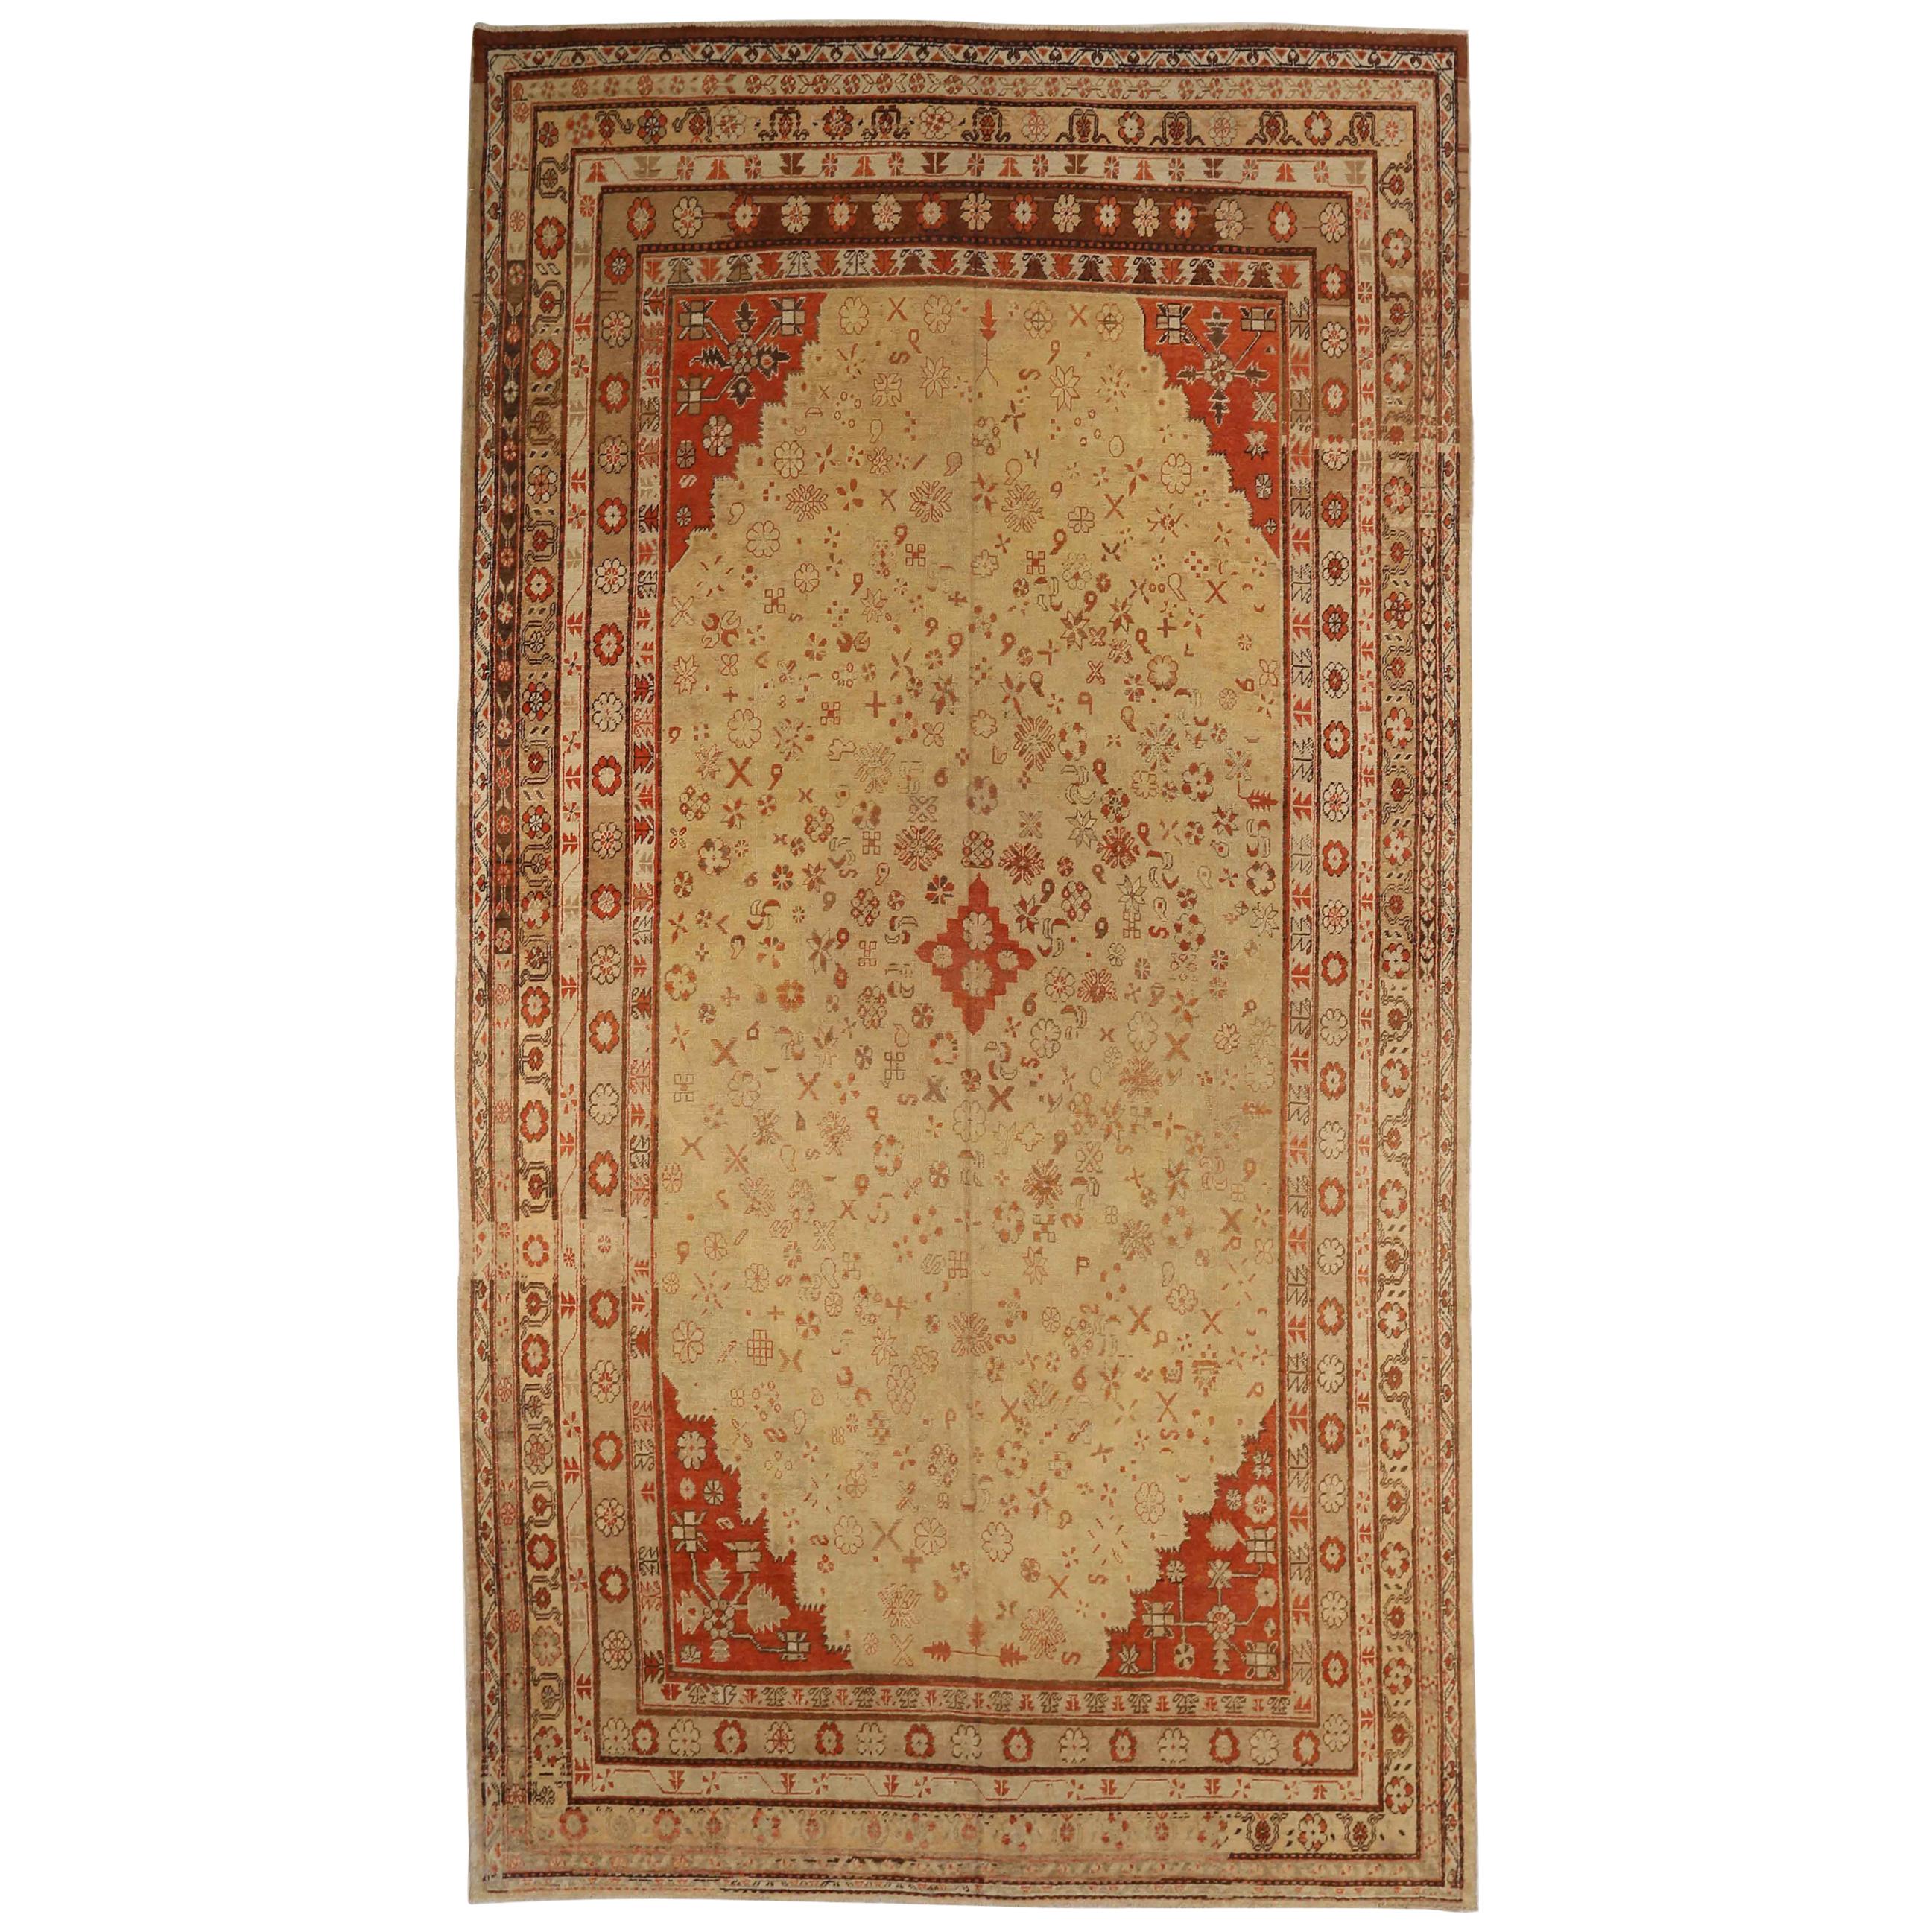 Antique Central Asian Rug Khotan Design with Multiple Floral Borders circa 1900s For Sale